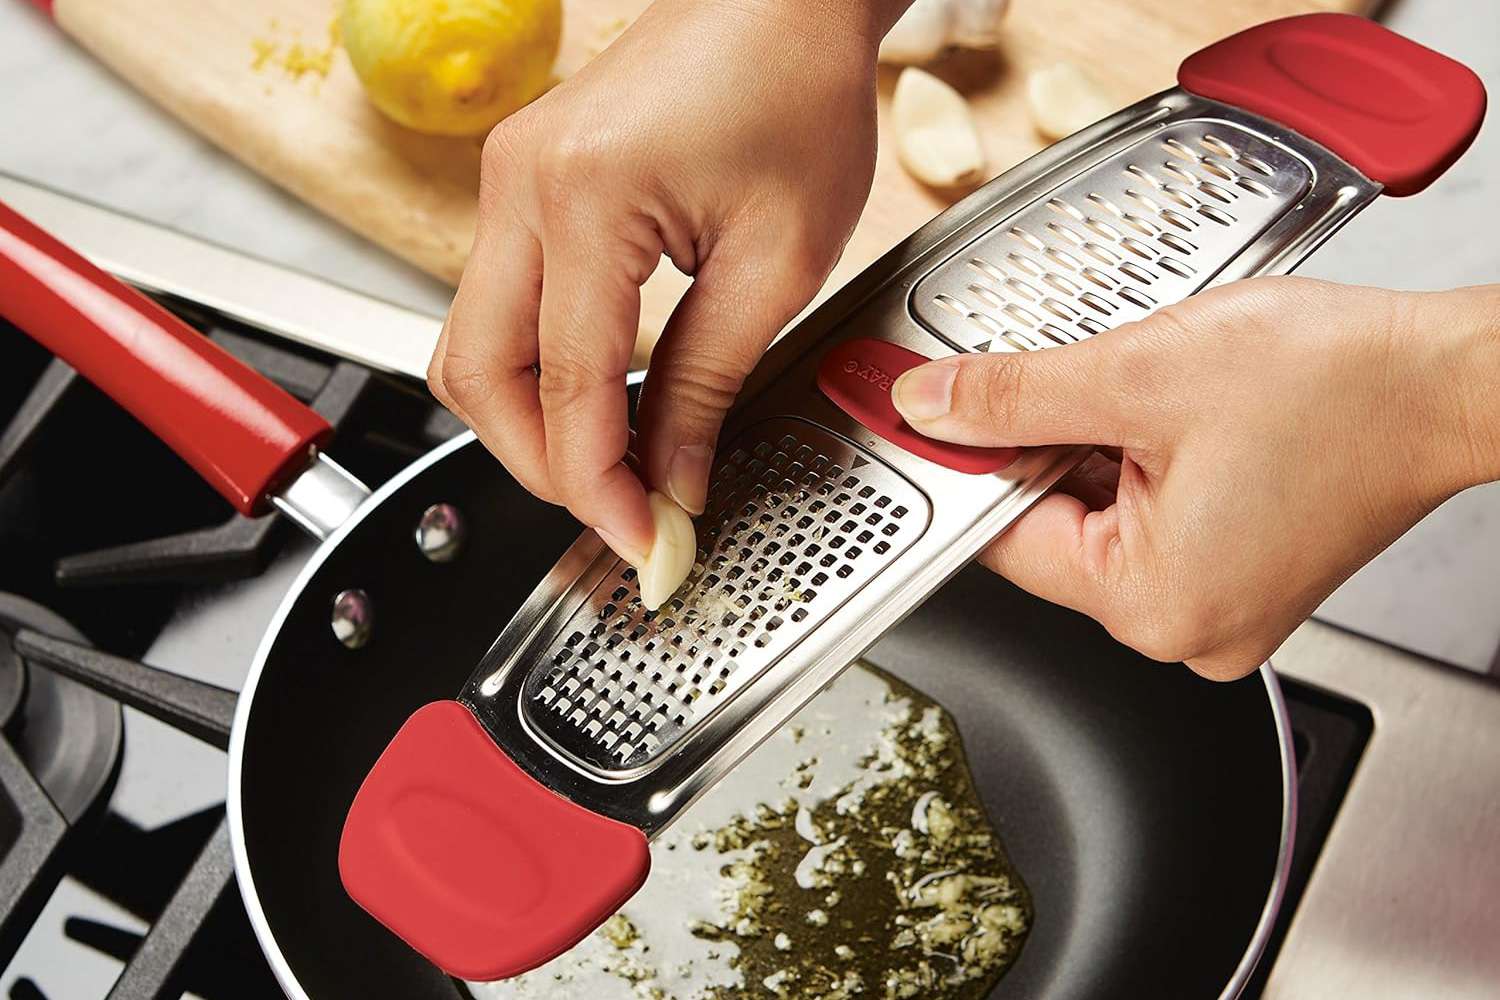 Rachael Ray Multi Stainless Steel Grater